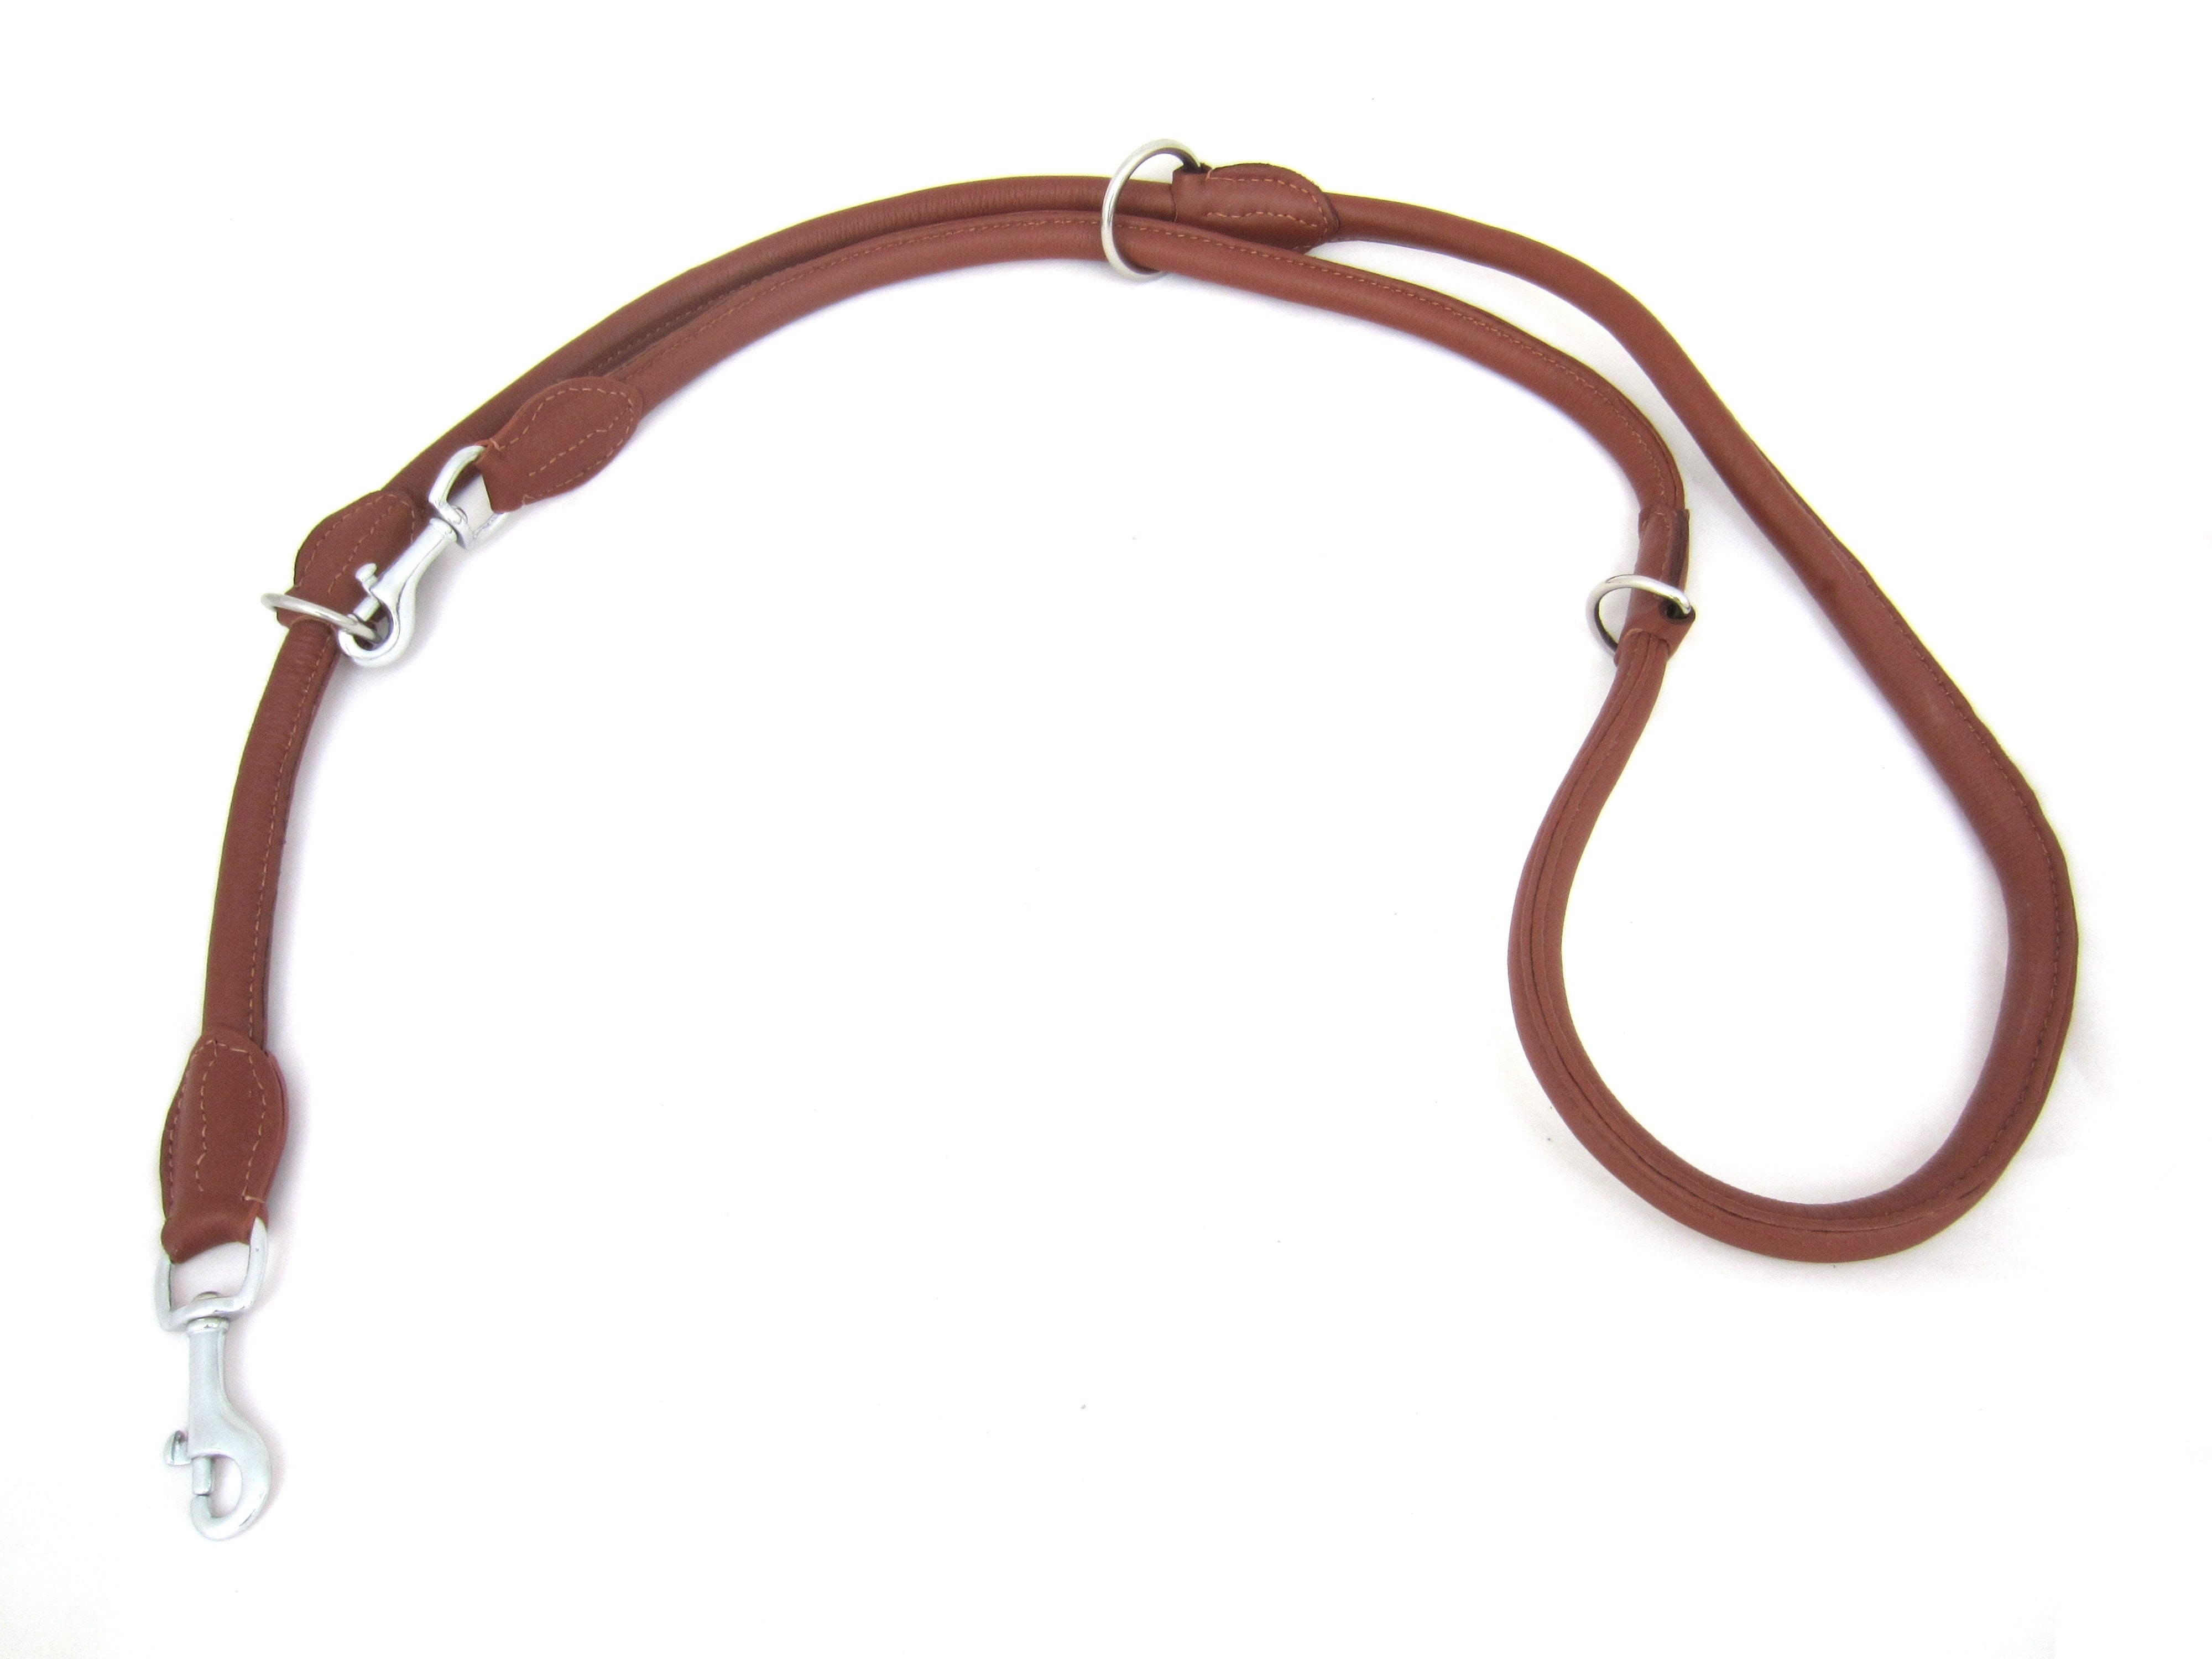 Leather dog leash "Vario Round" round stitched, 3-way adjustable made of soft nappa leather